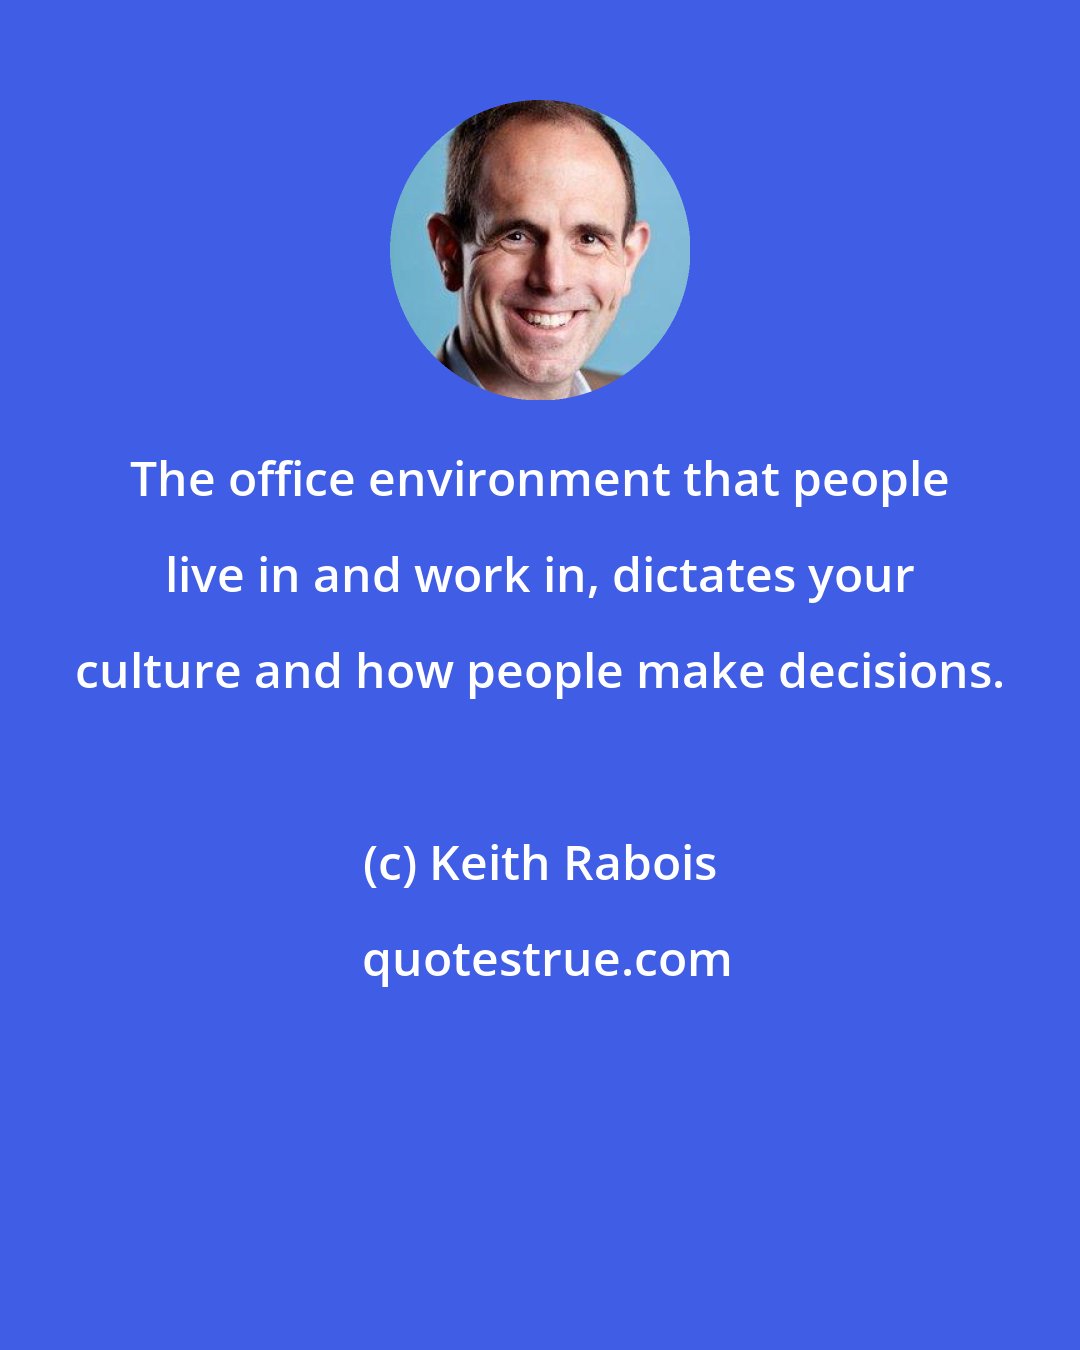 Keith Rabois: The office environment that people live in and work in, dictates your culture and how people make decisions.